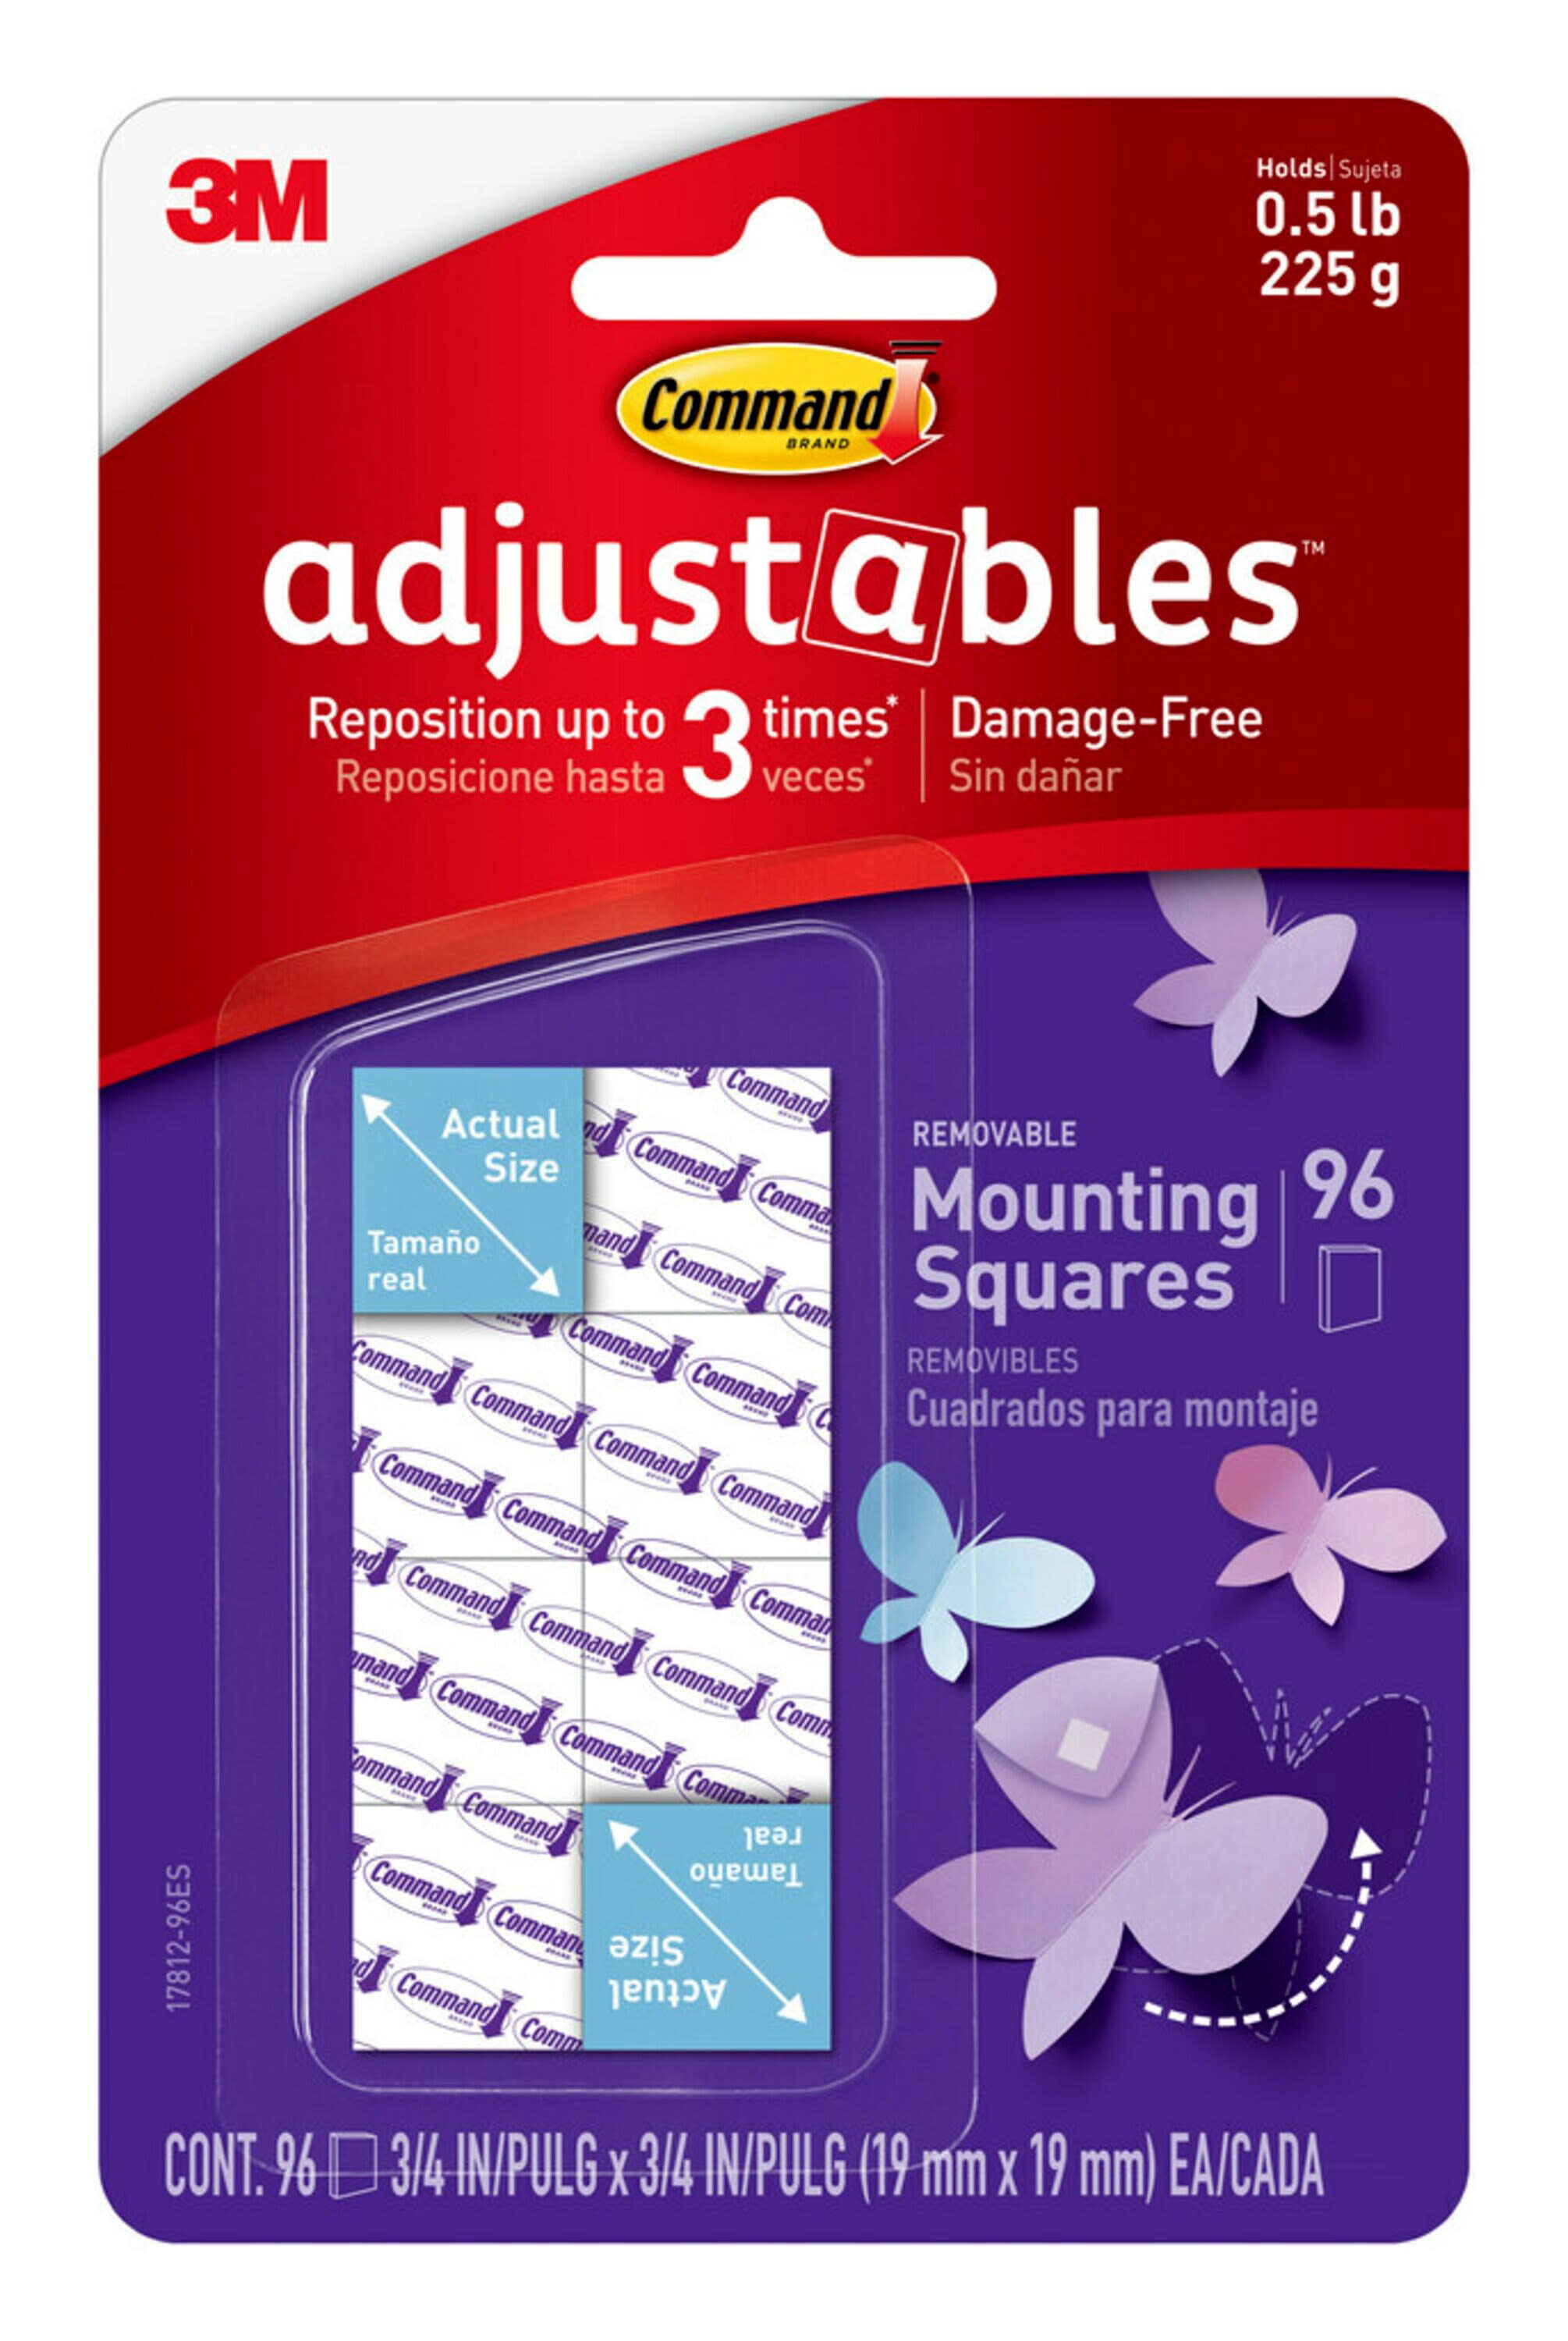 Command Adjustables Repositionable Indoor Removable Adhesive Mounting Squares, White, 96 Squares